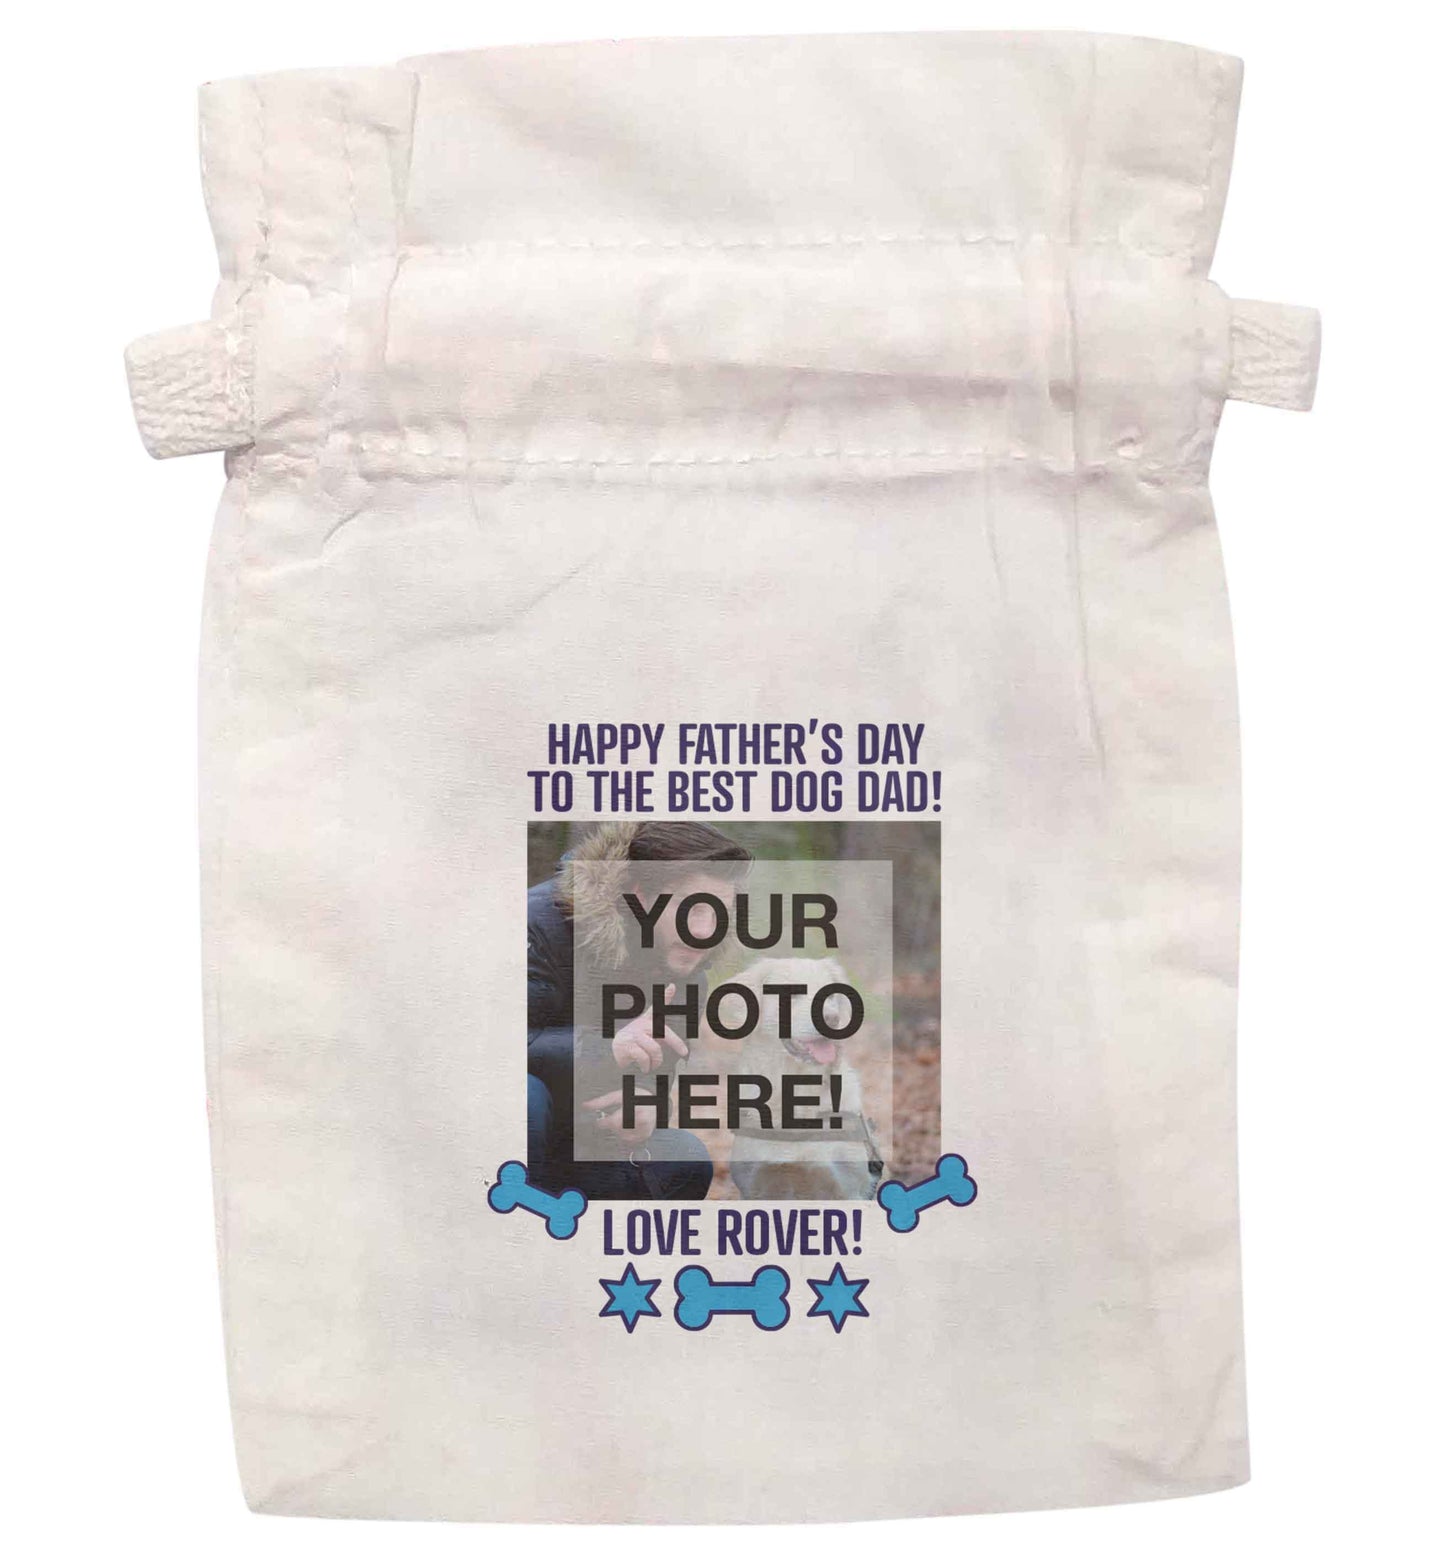 Happy Father's day to the best dog dad - personalised photo and name | XS - L | Pouch / Drawstring bag / Sack | Organic Cotton | Bulk discounts available!